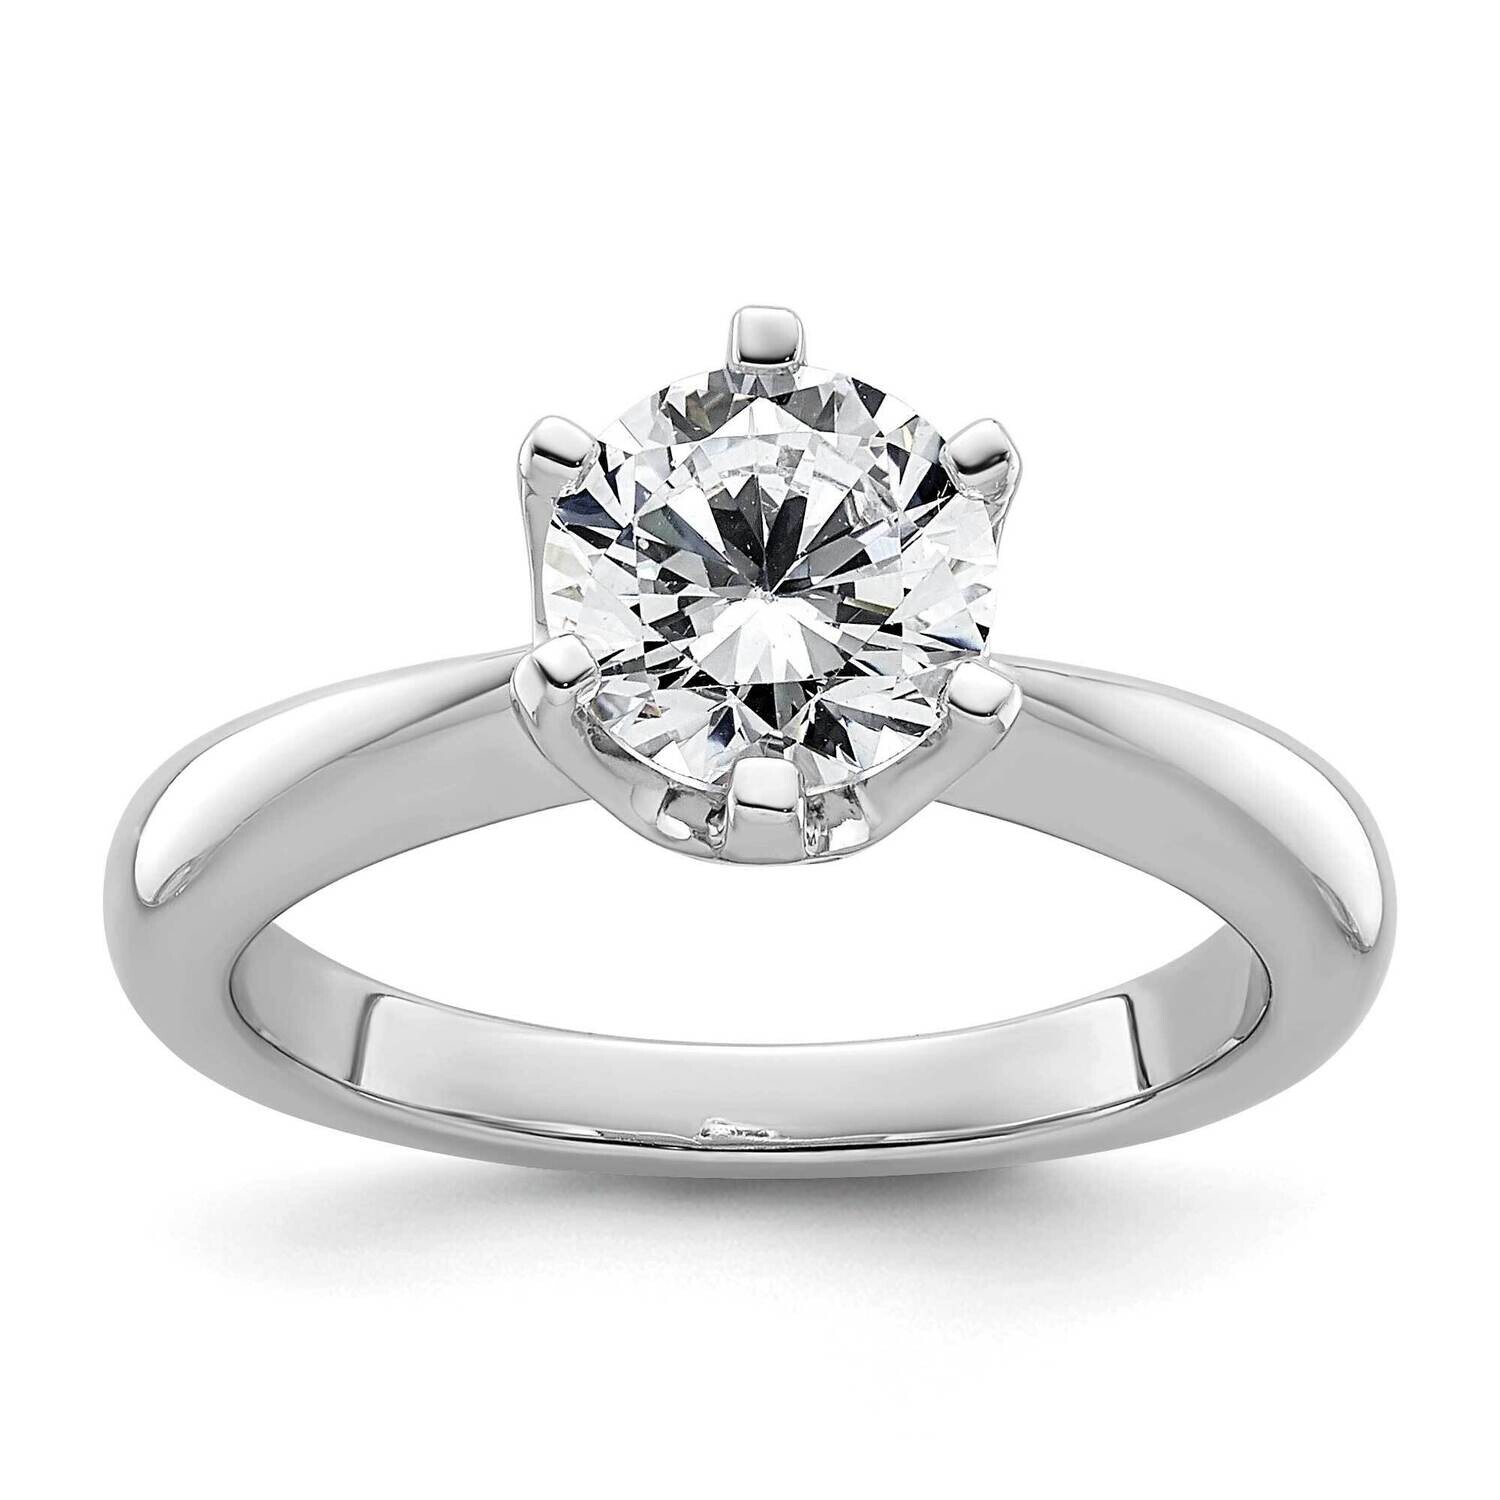 1.5 Carat 7.50 mm 6-Prong Round Solitaire Engagement Ring Mounting 14k White Gold RM1936E-150-CWAA